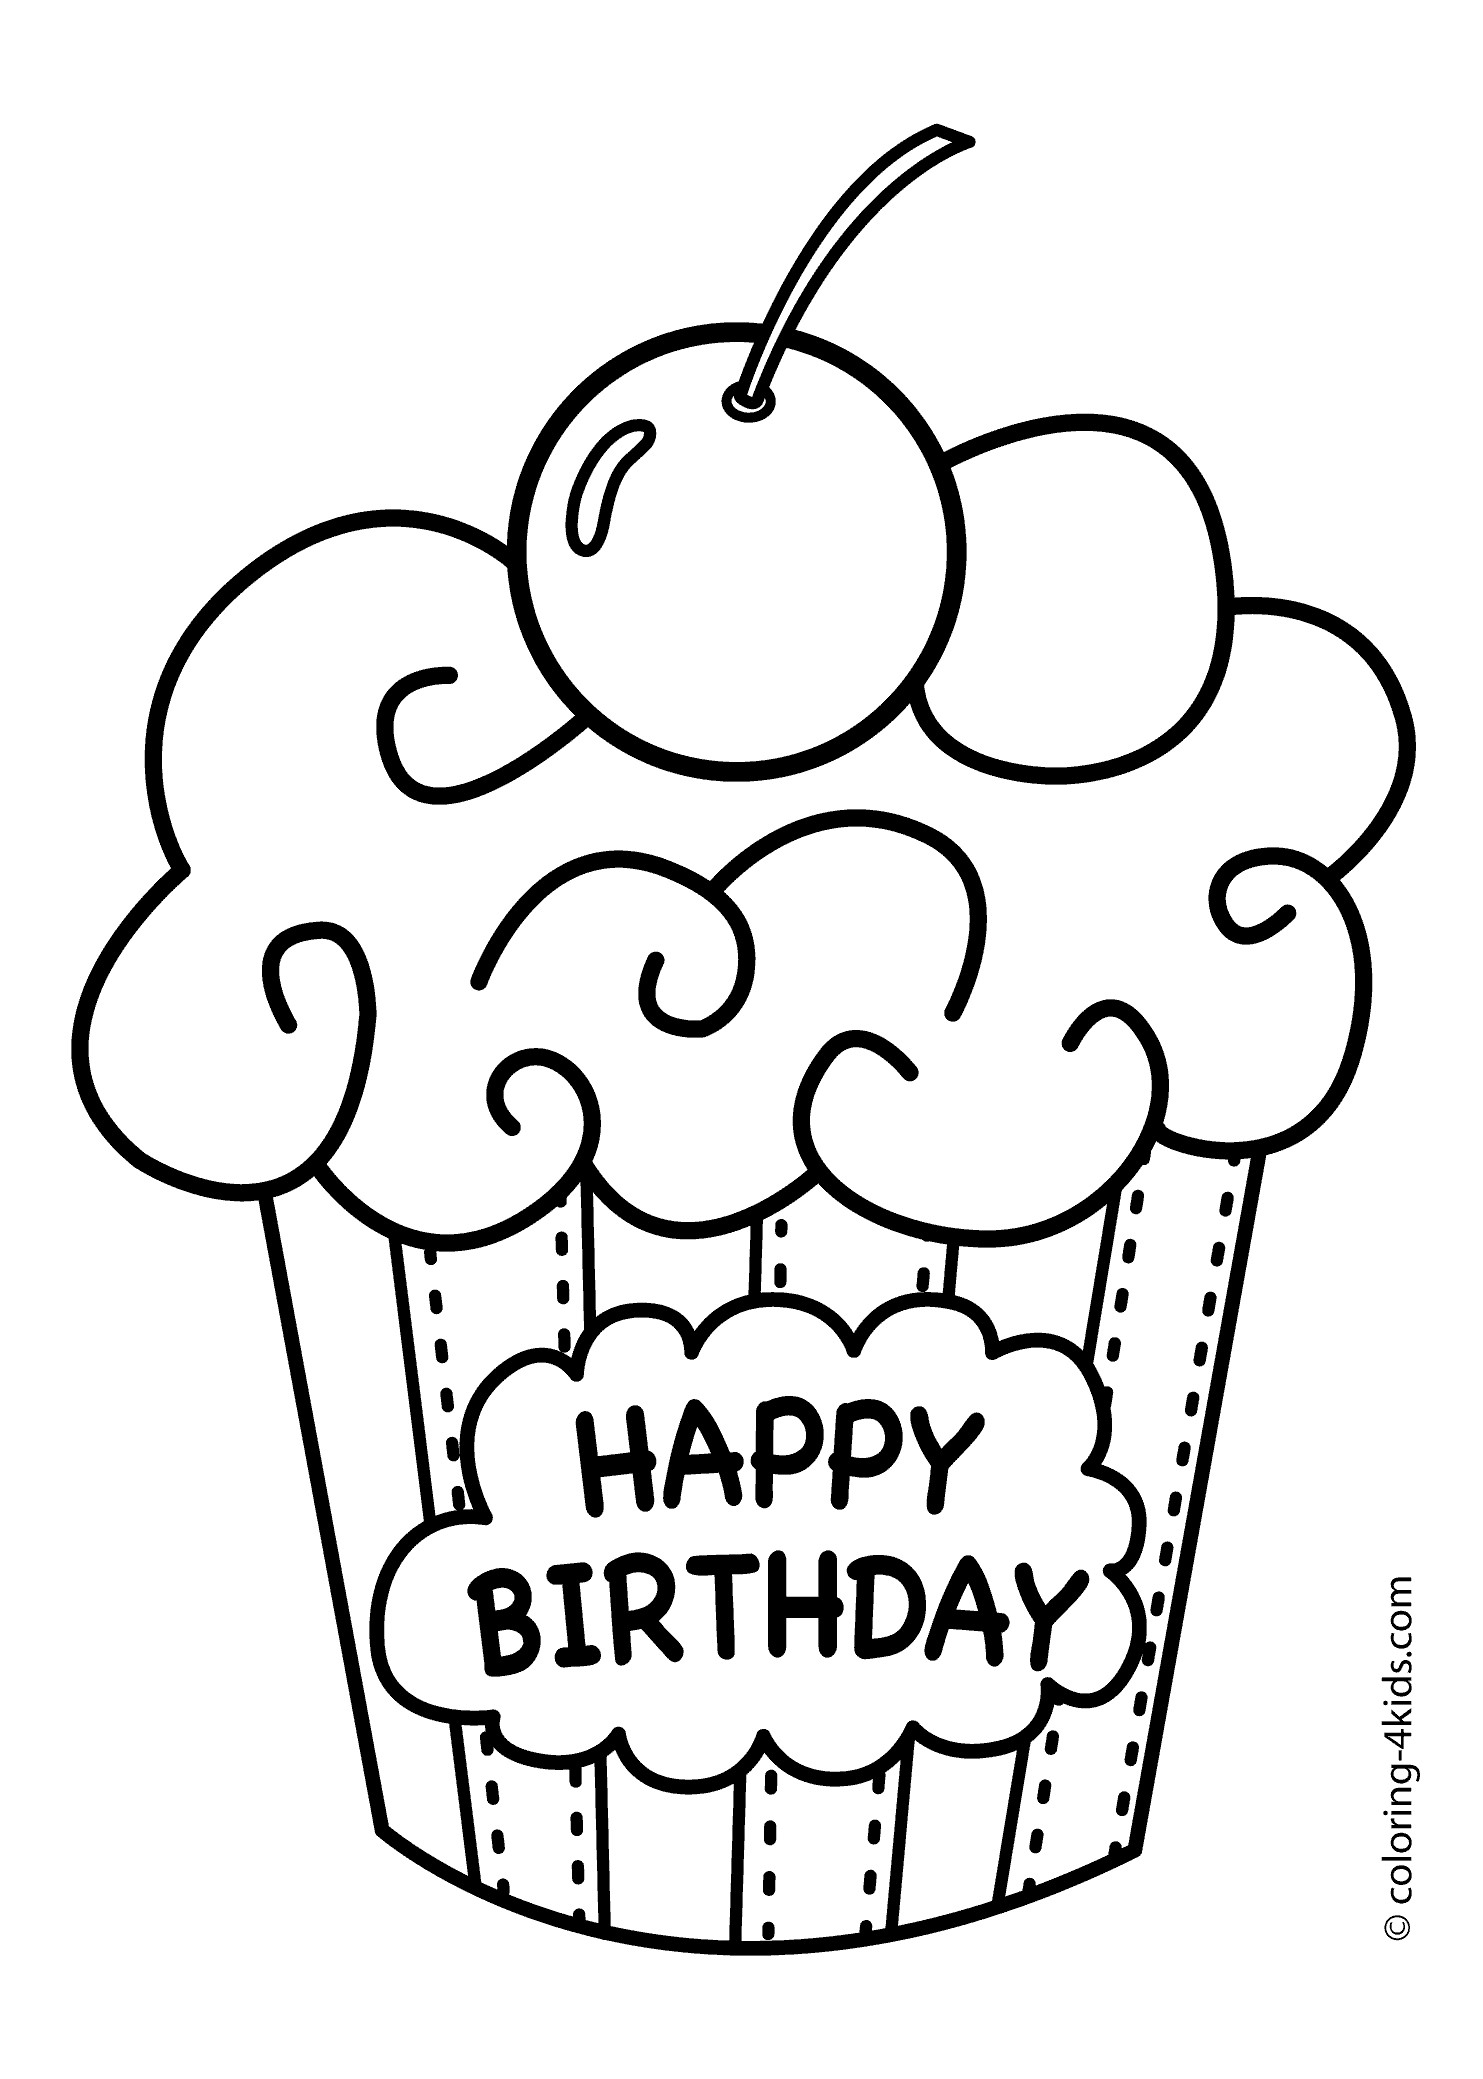 Coloring Sheets For Girls The Birthday Boy
 Free Coloring Pages For Girls Printable Birthday Card